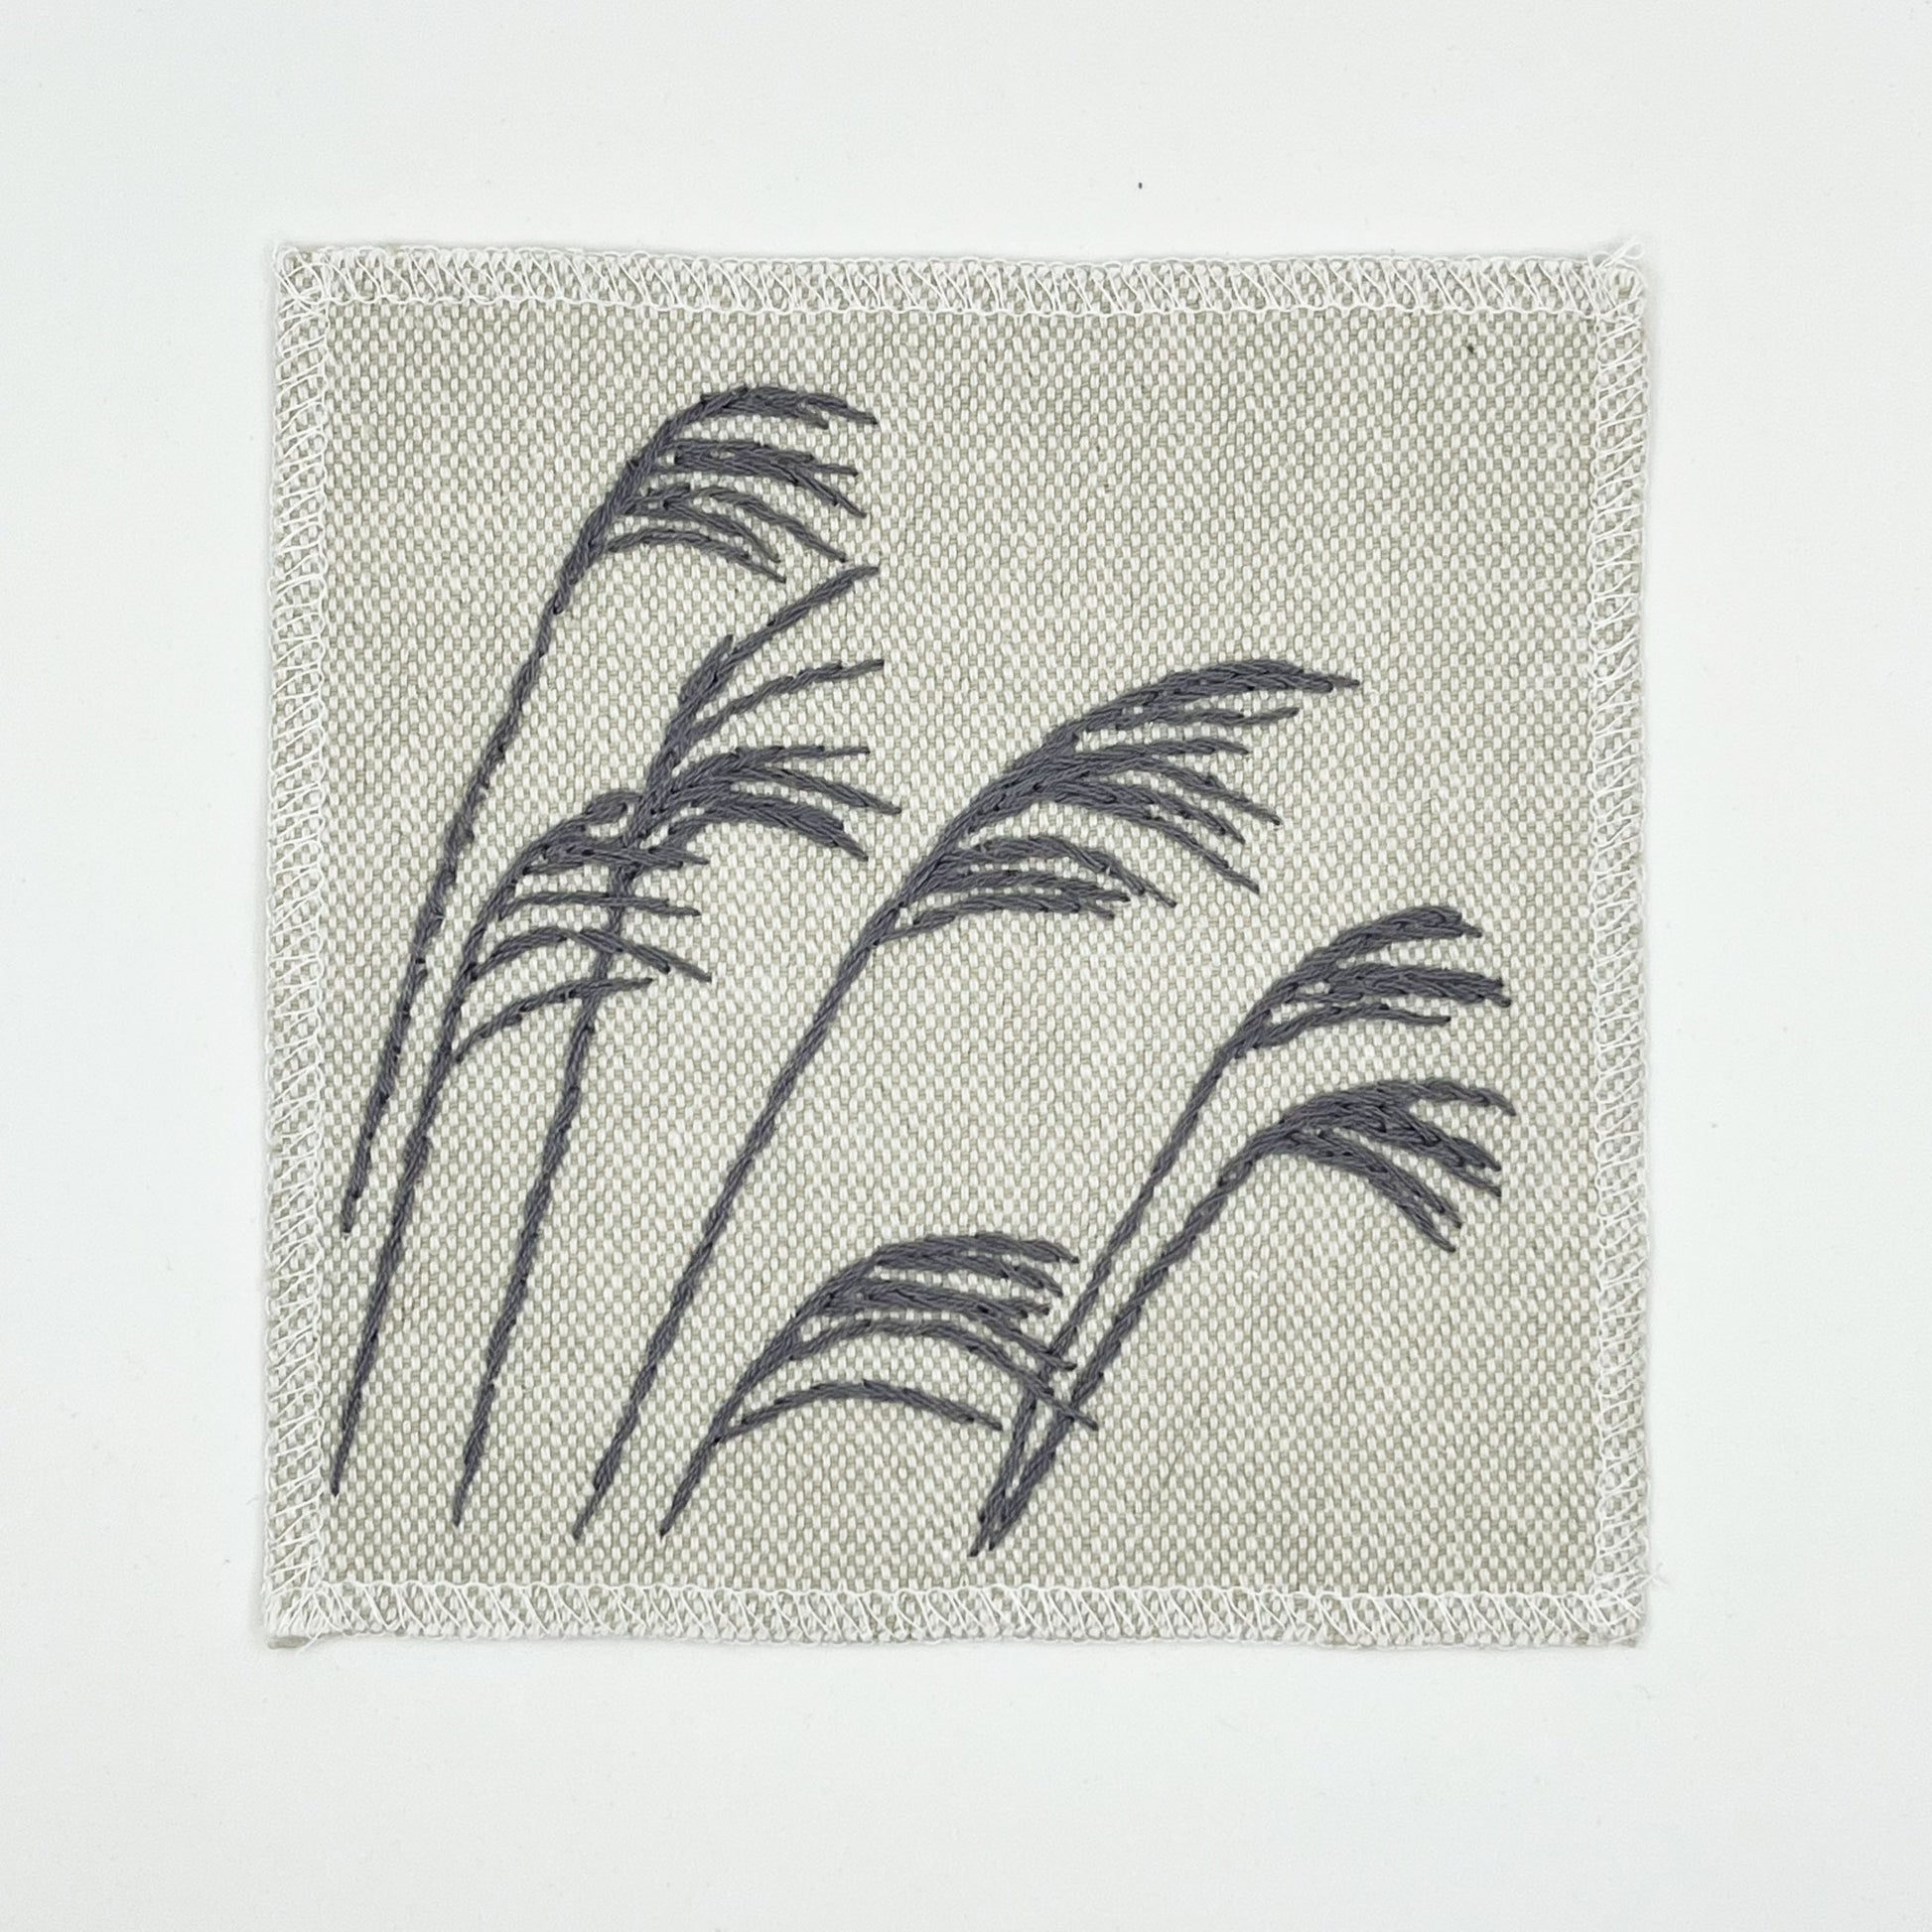 a cream colored square patch with stalks of wild grass stitched in grey thread with a stem stitch, on a white background